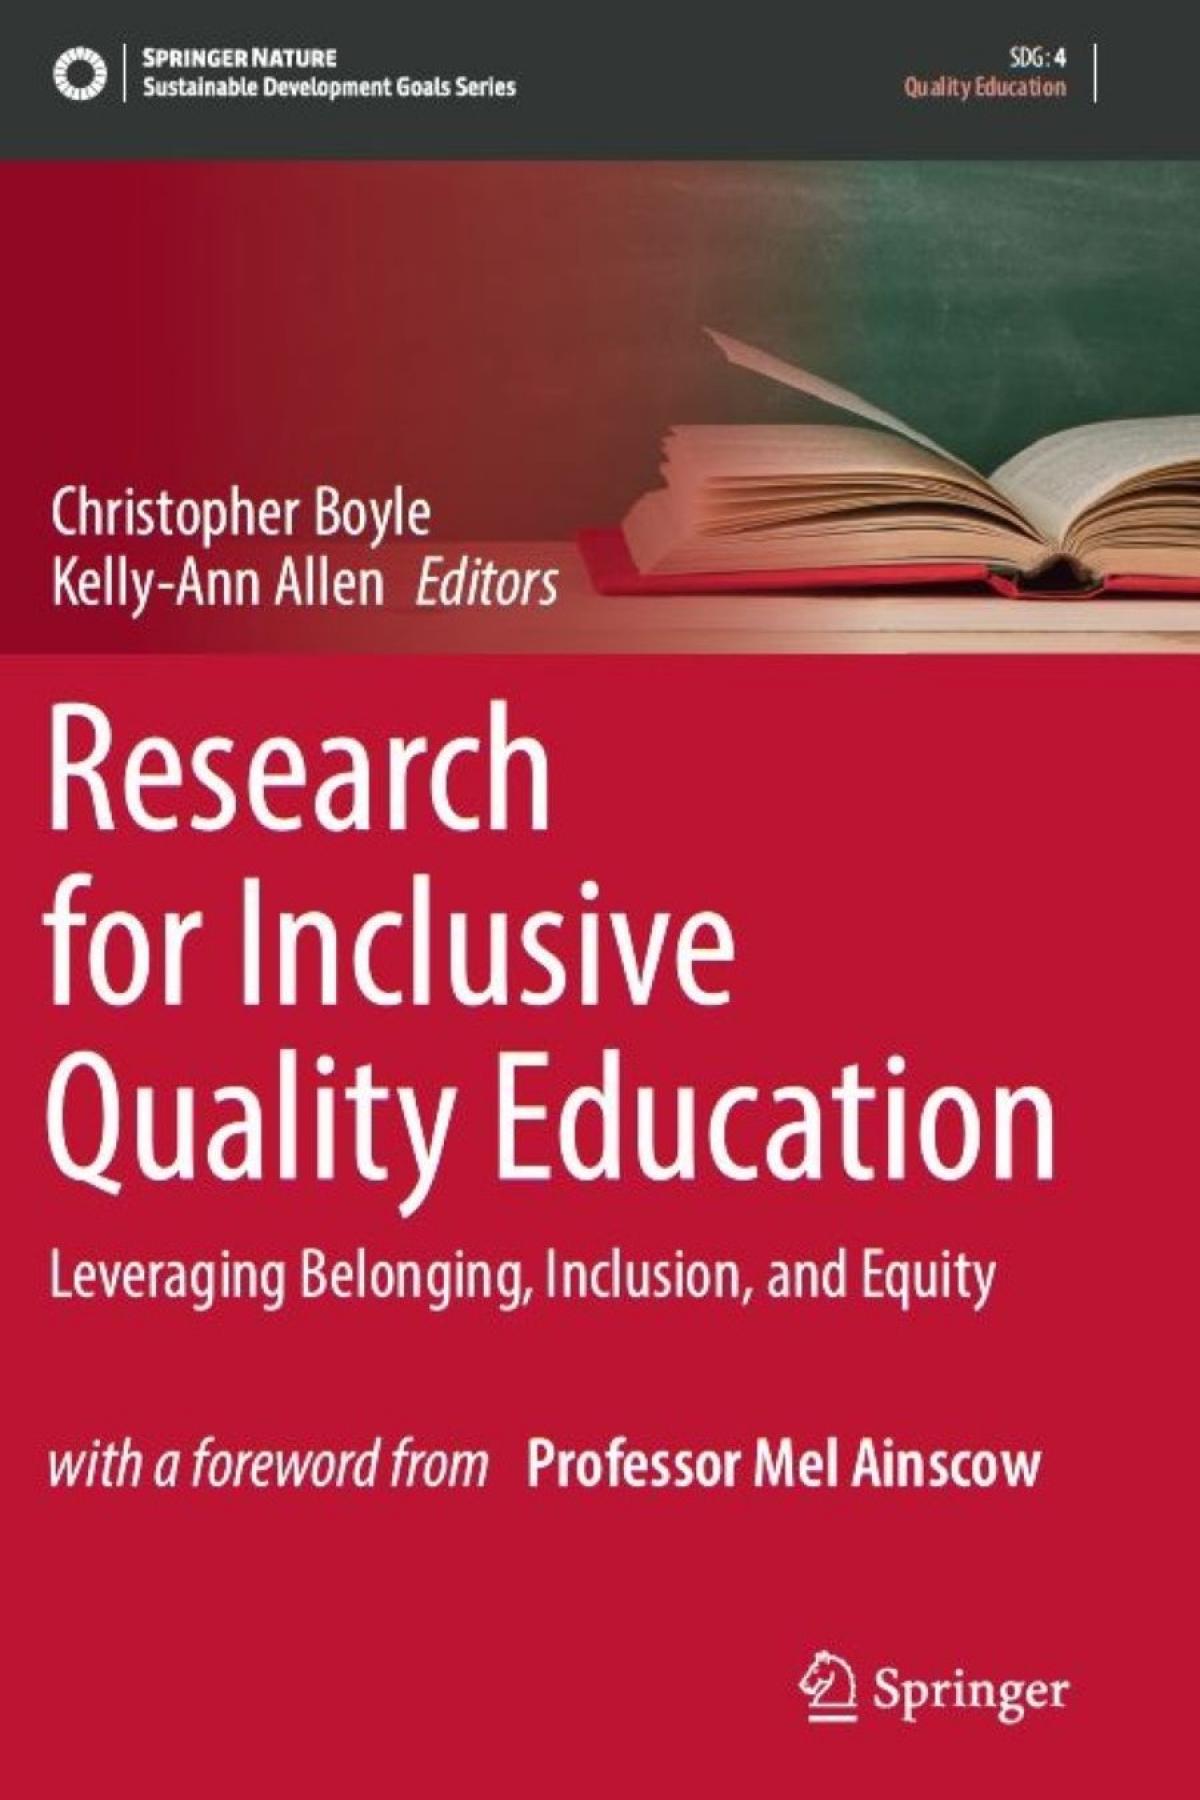 Research for Inclusive Quality Education: Leveraging Belonging, Inclusion and Equity